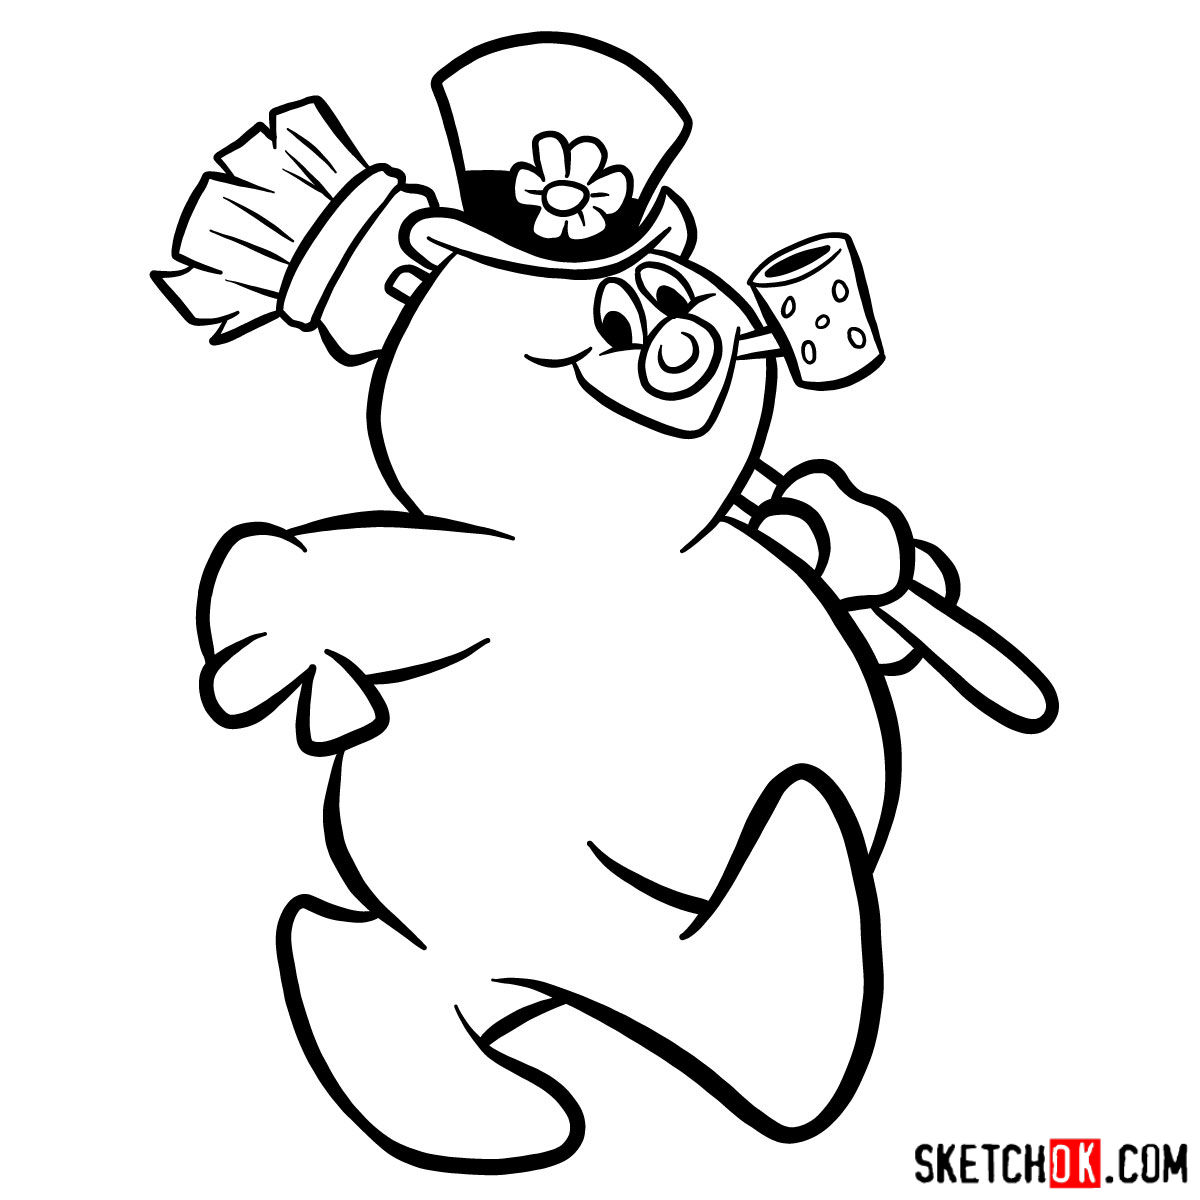 How to draw Frosty the Snowman - step 10